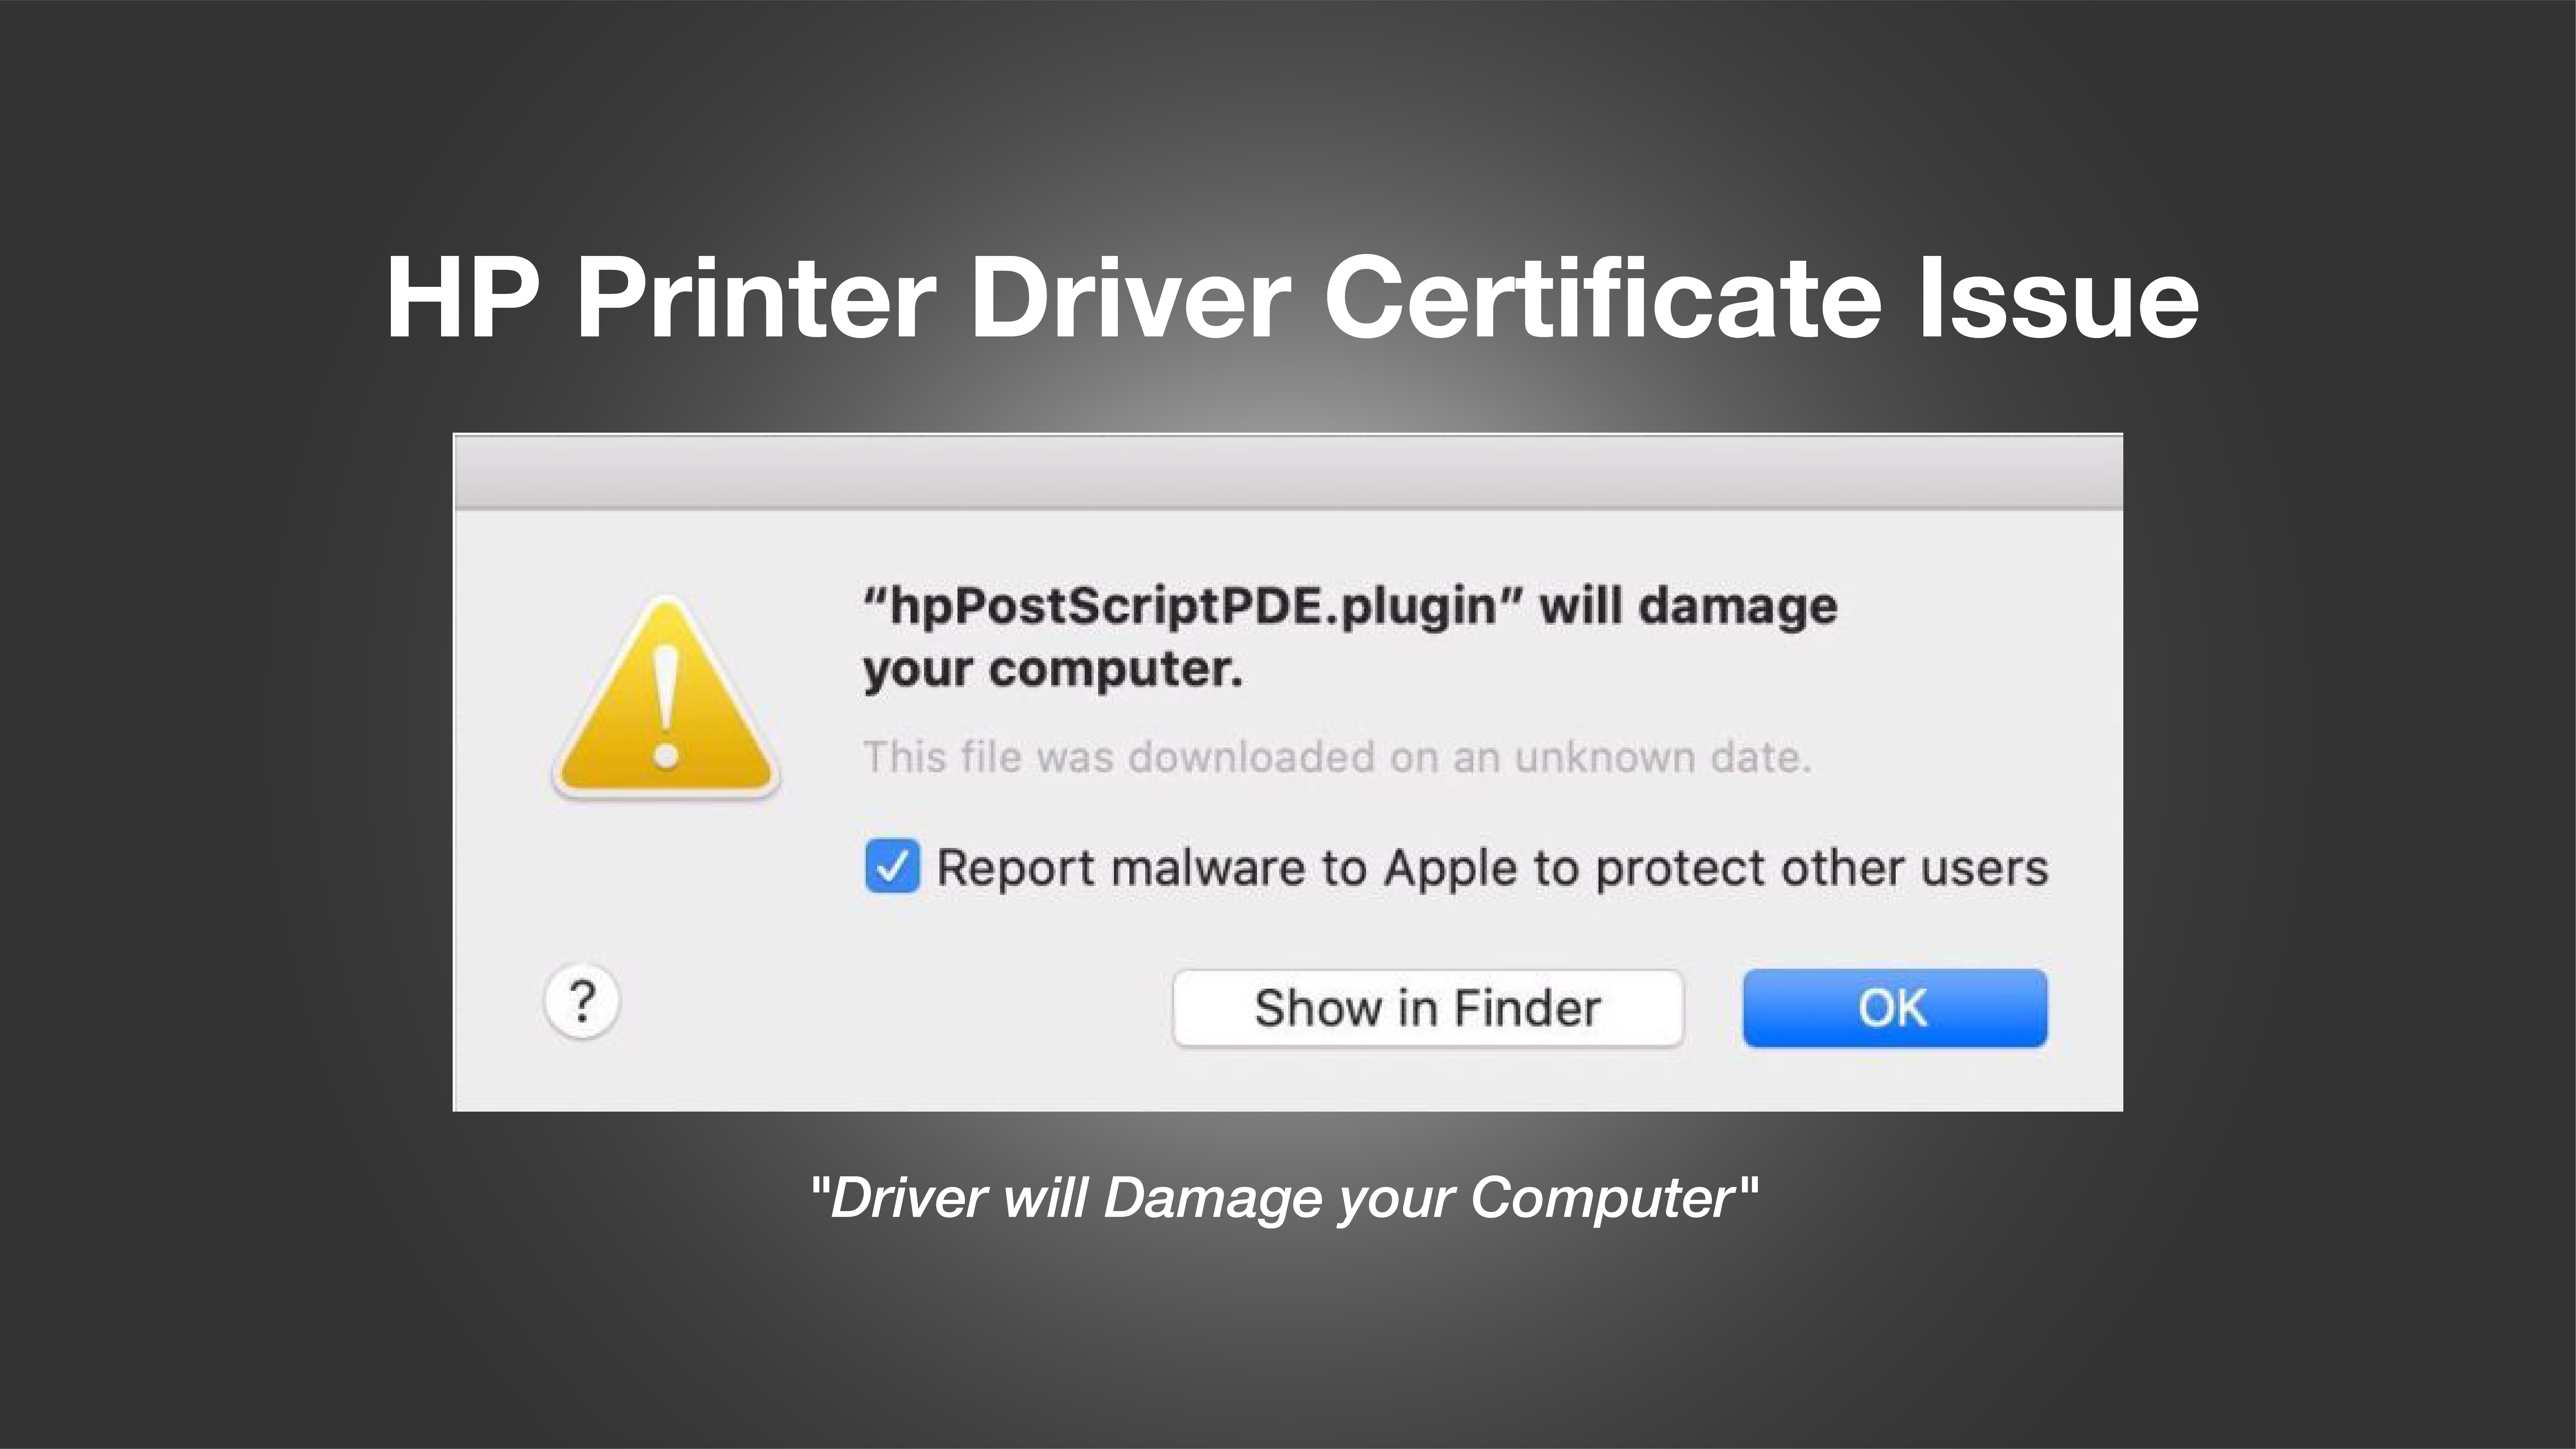 HP Printer Driver Certificate Issue